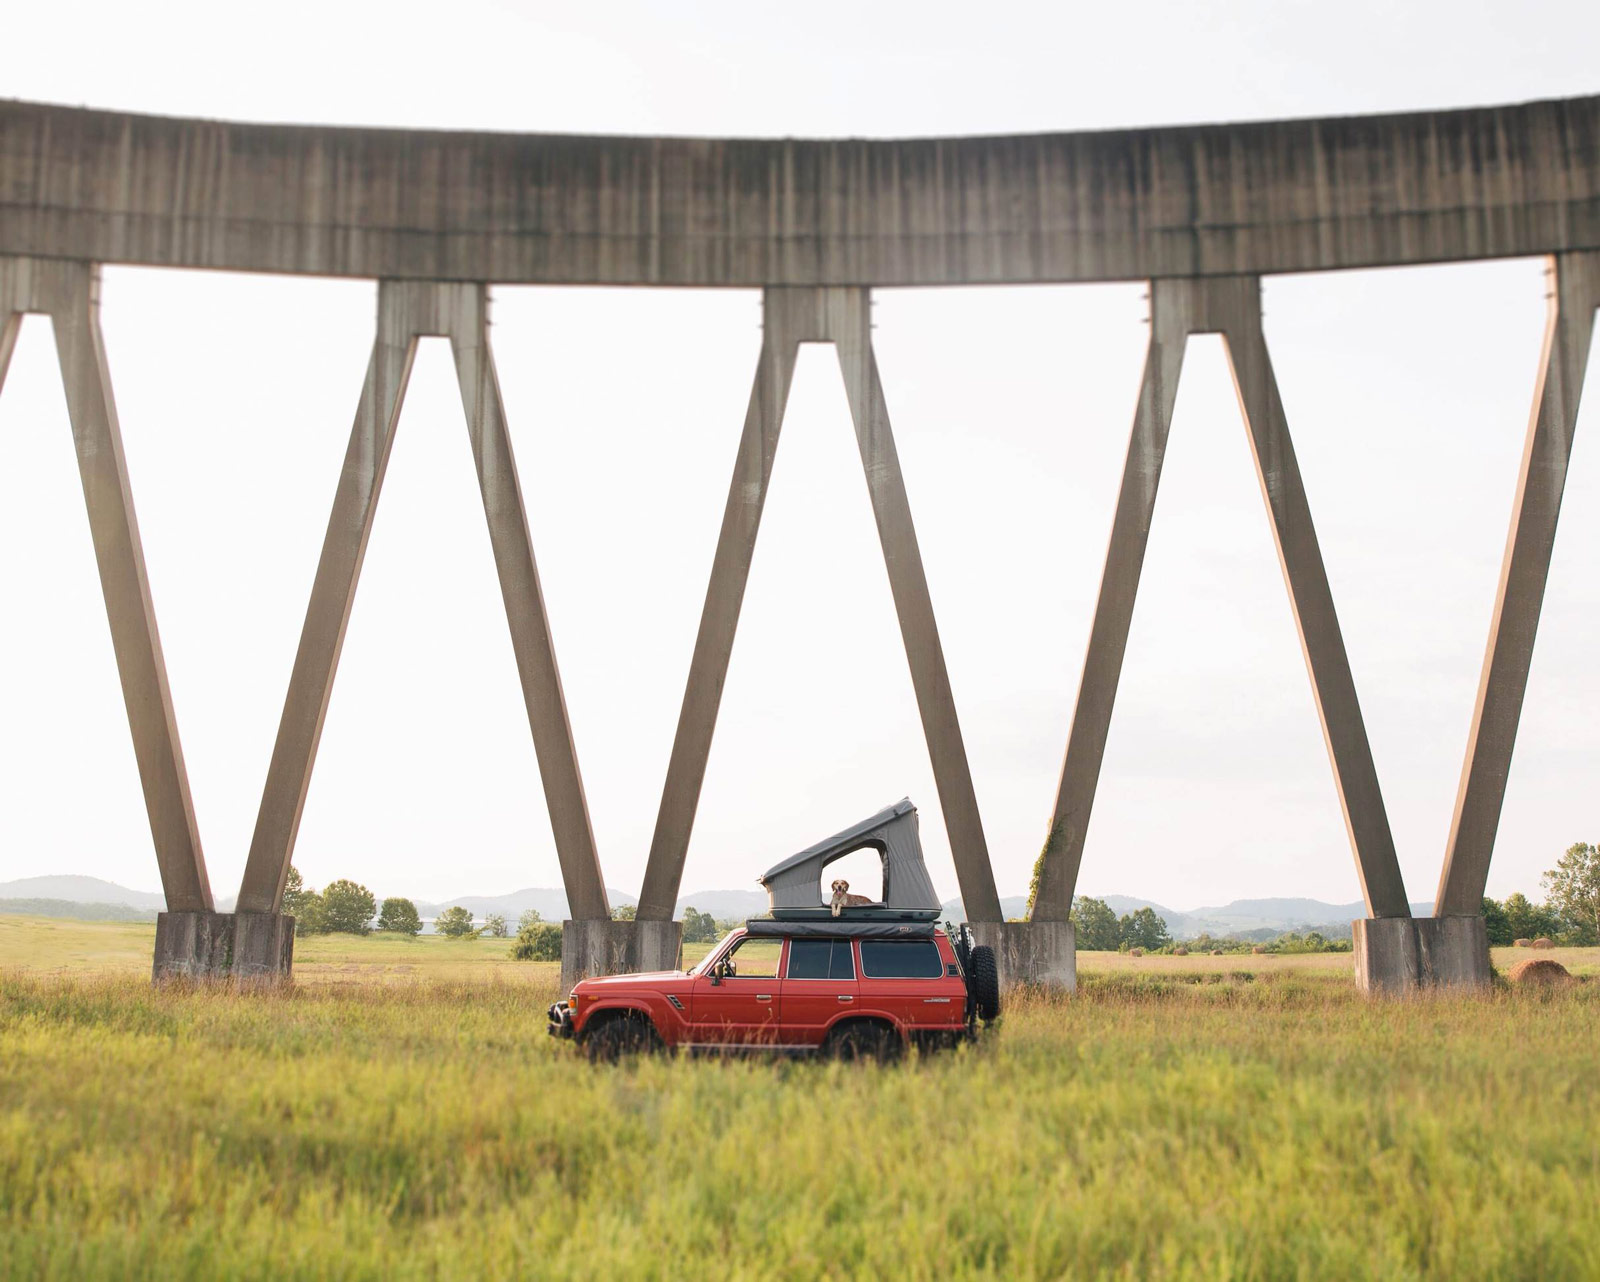 Camping near an abandoned, unfinished nuclear cooling tower in Tennessee, July 2014